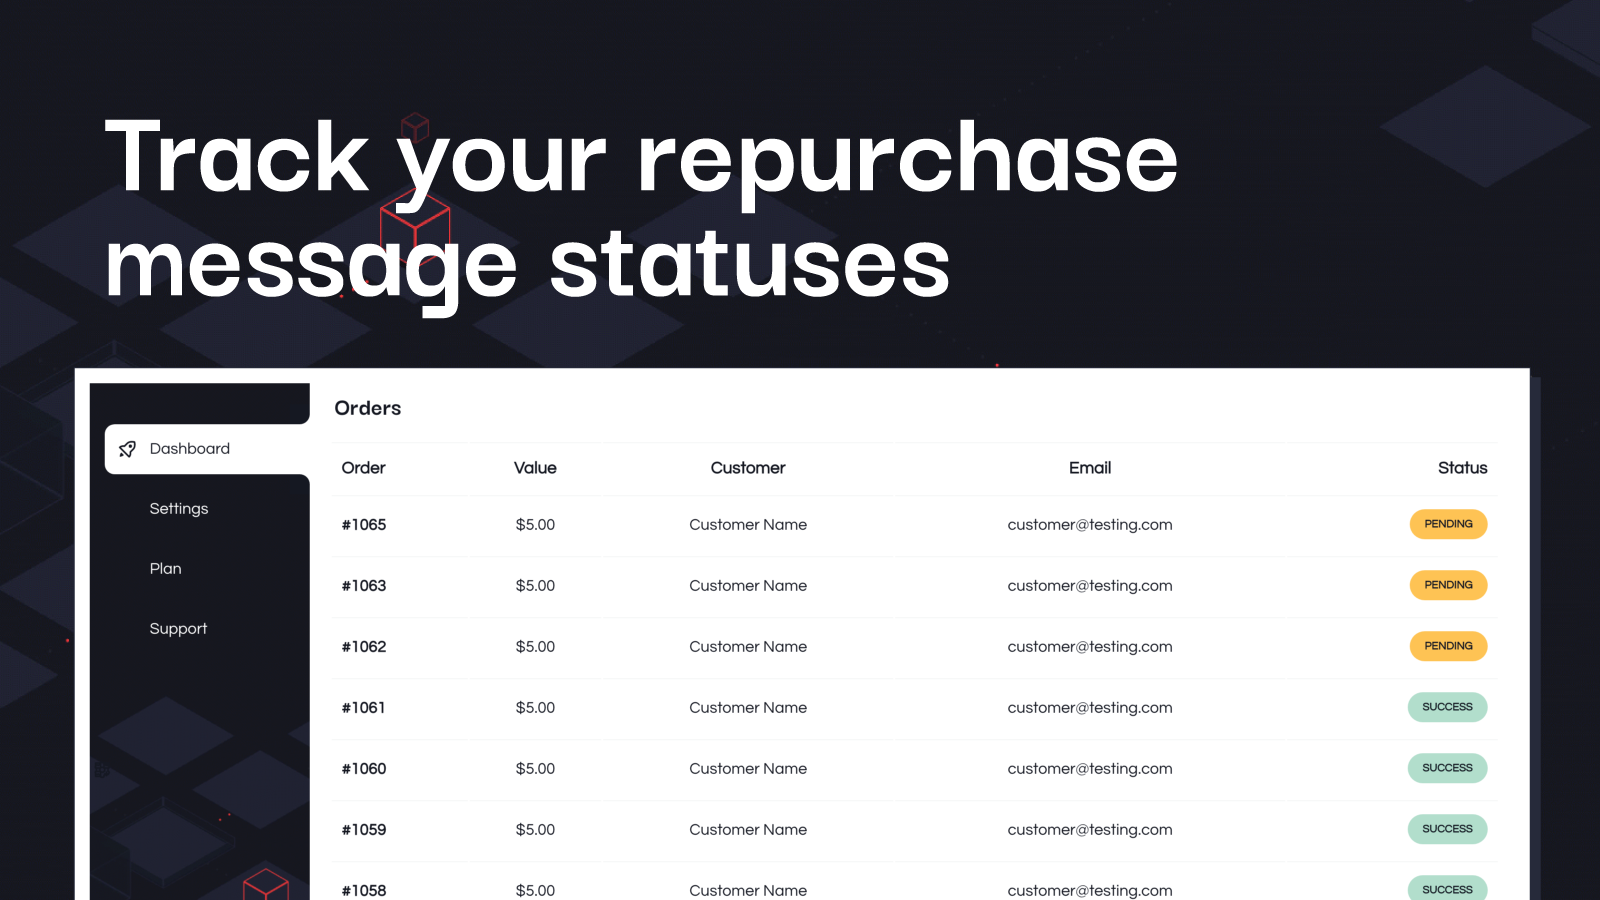 Track your repurchase message statuses